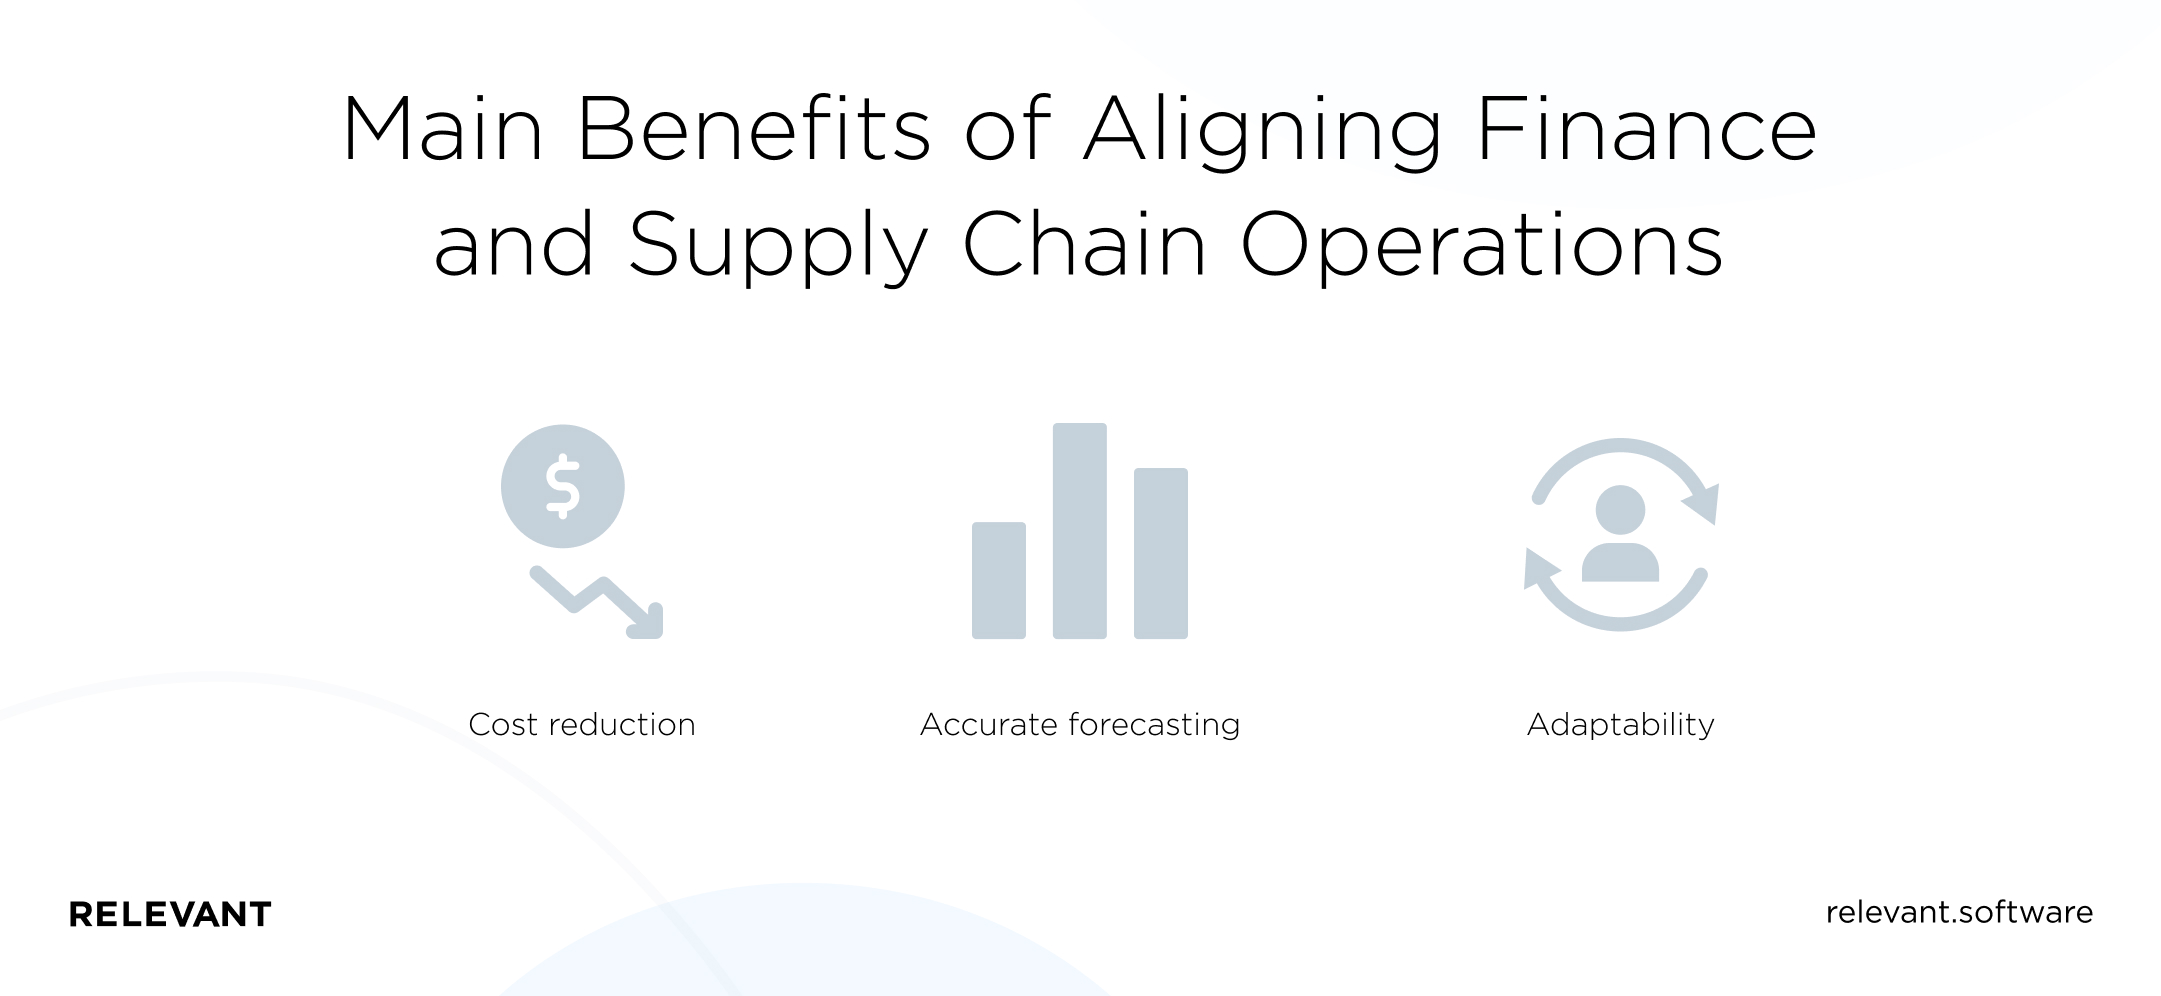  Benefits of Aligning Finance and Supply Chain Operations
- Cost reduction